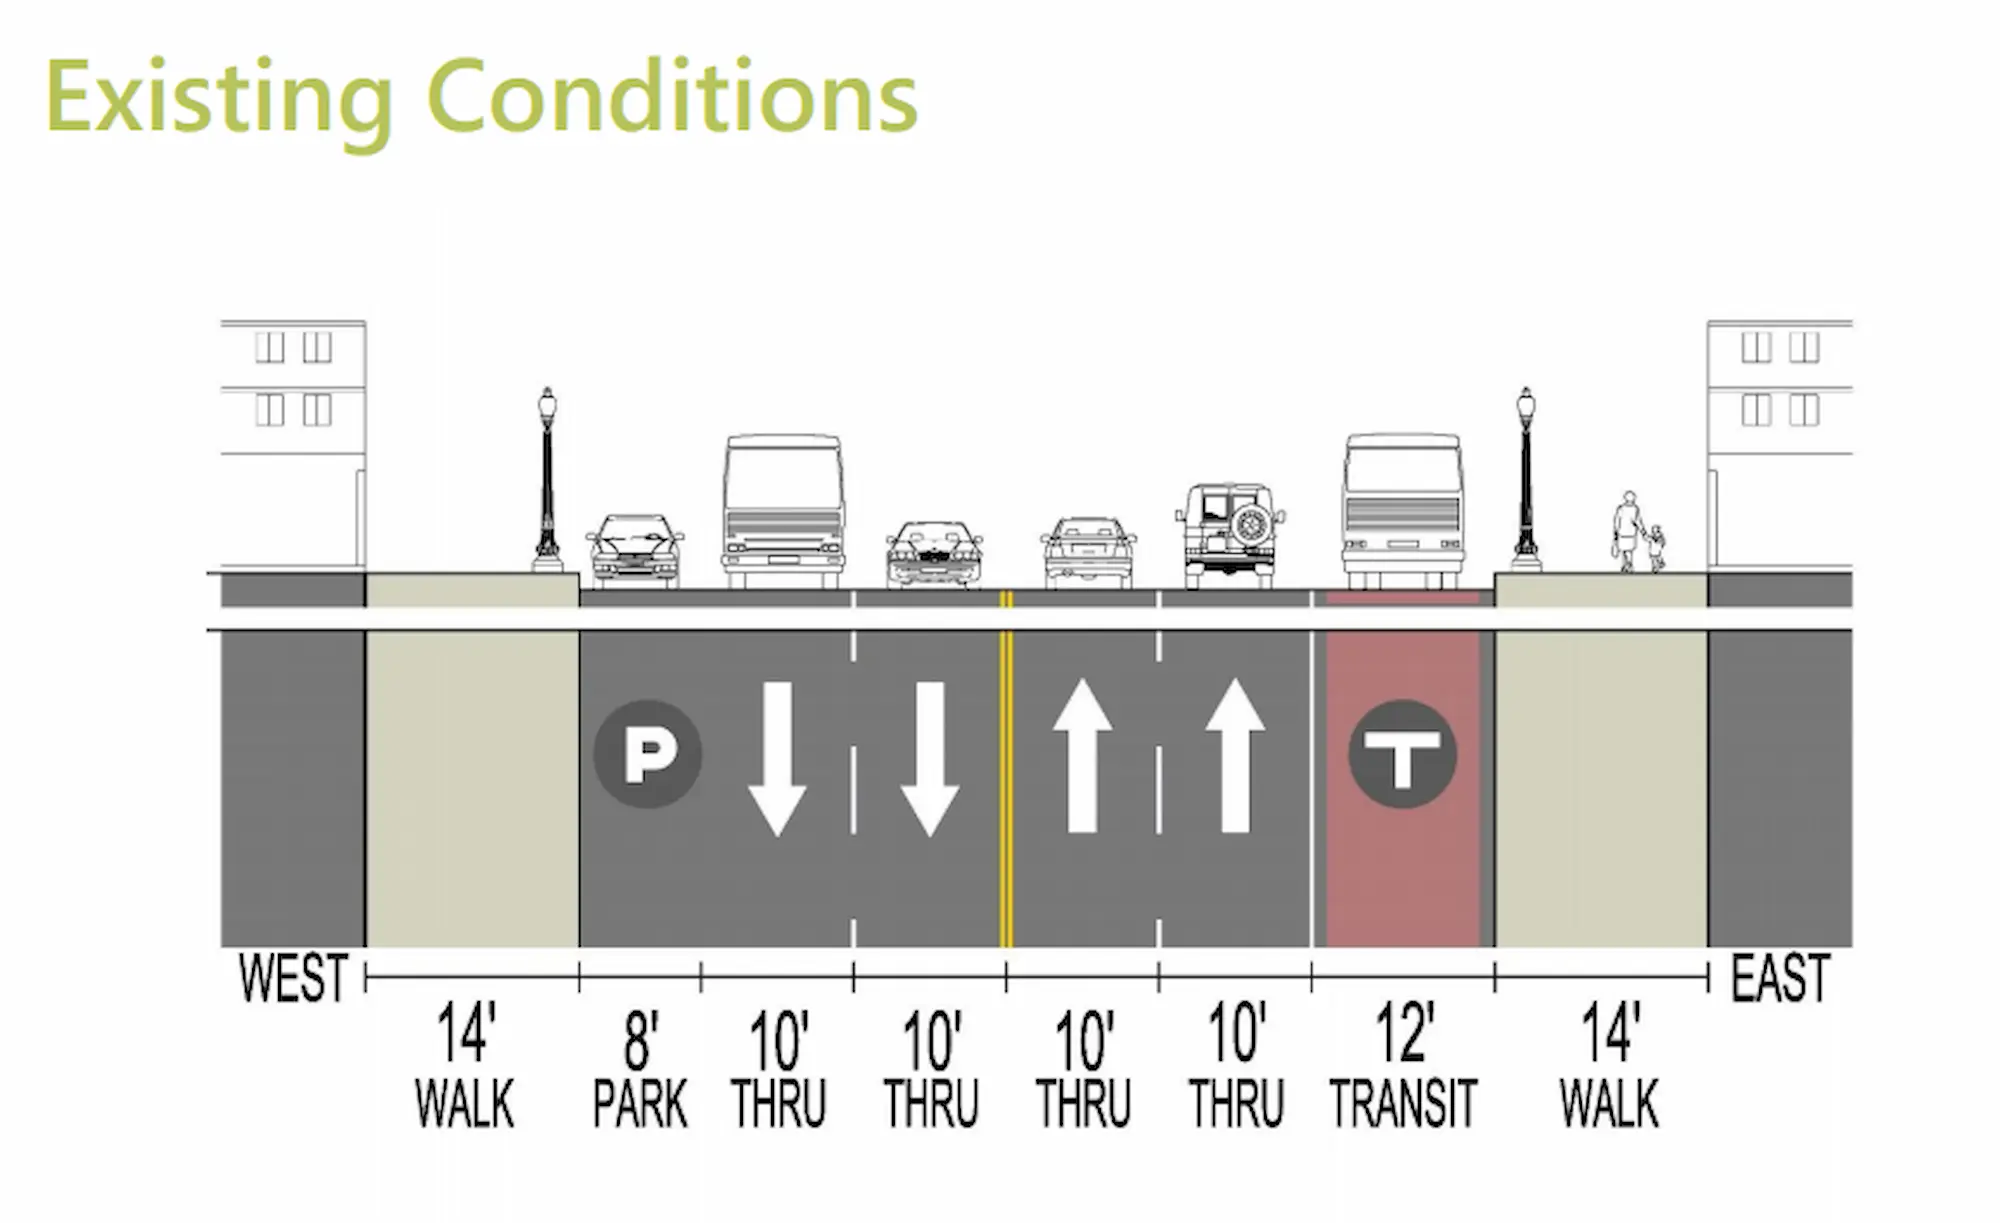 Existing conditions on Hennepin Ave S from Douglas Ave to Lake St